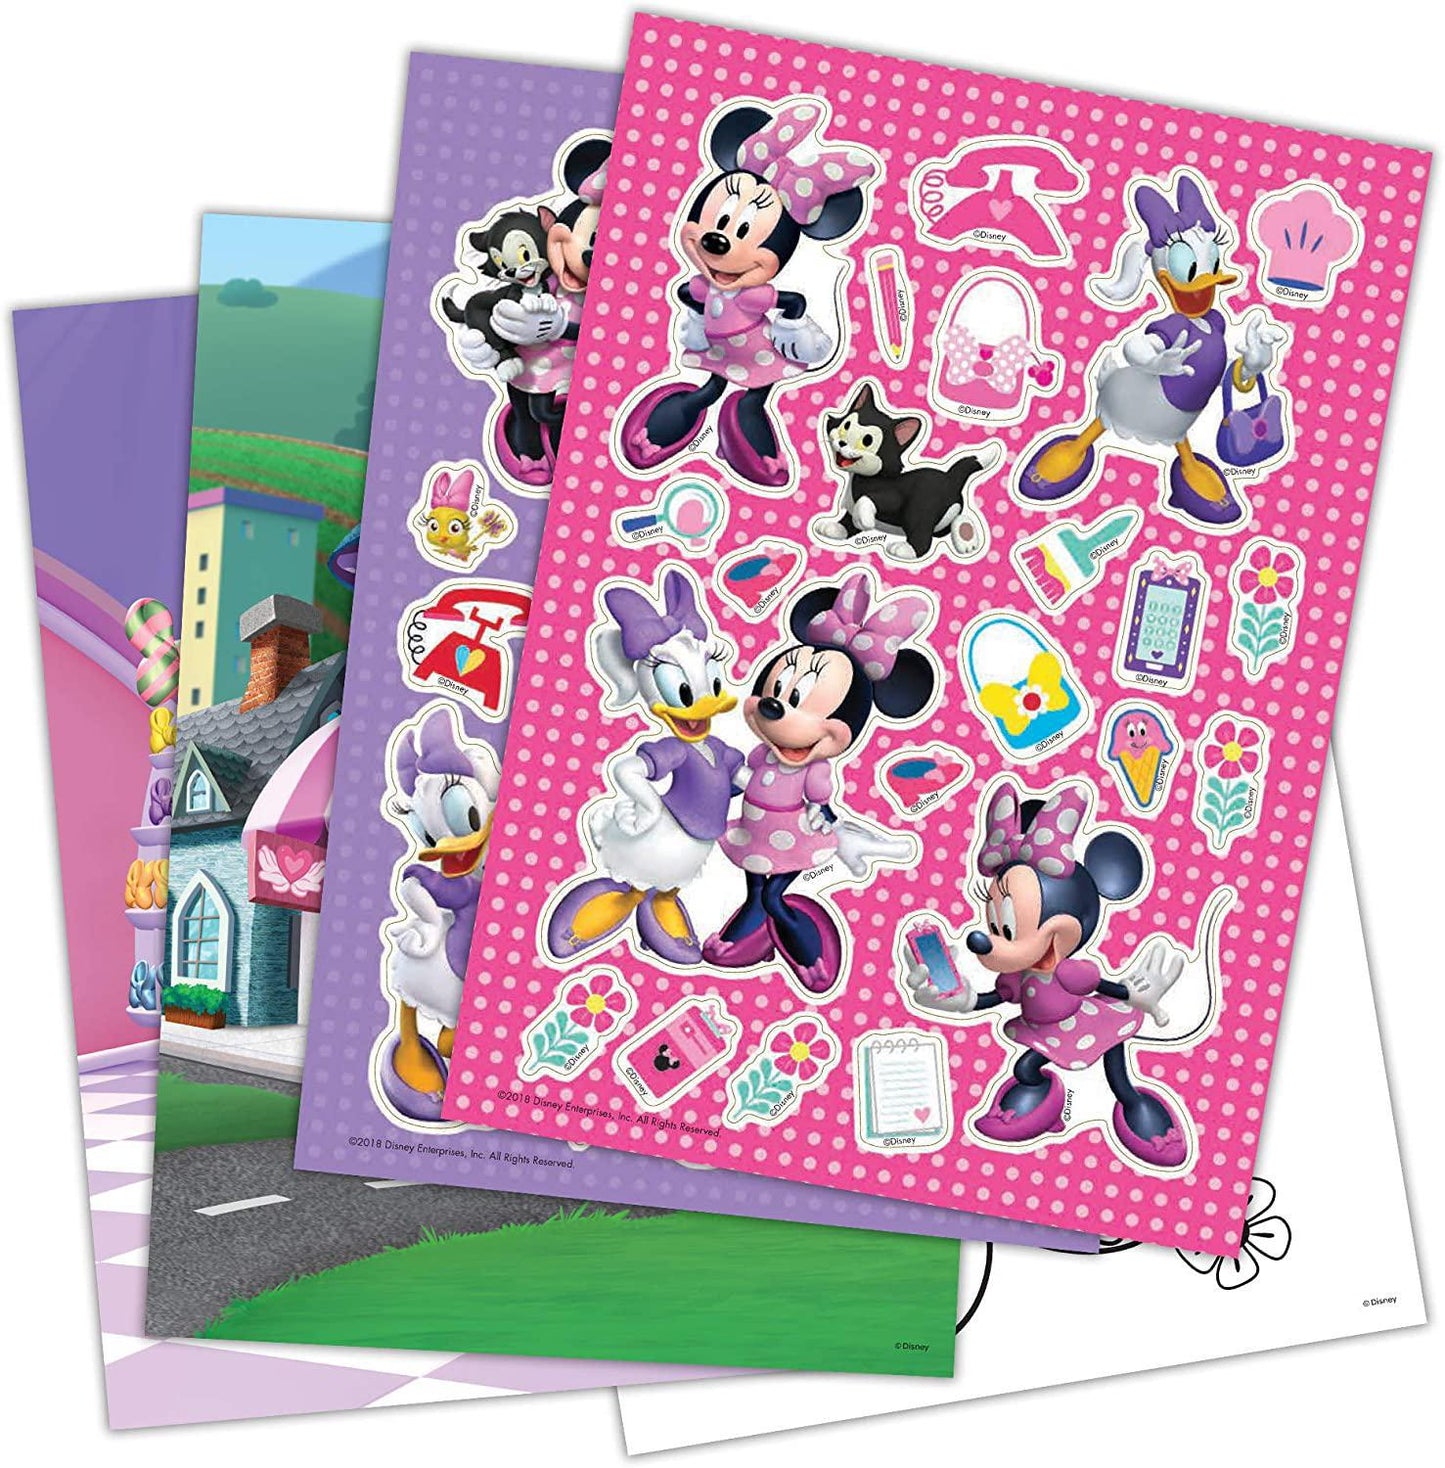 Bendon Create A Scene Sticker Activity Coloring Pad Assortment - Minnie Mouse, Disney Princess, Toy Story 4